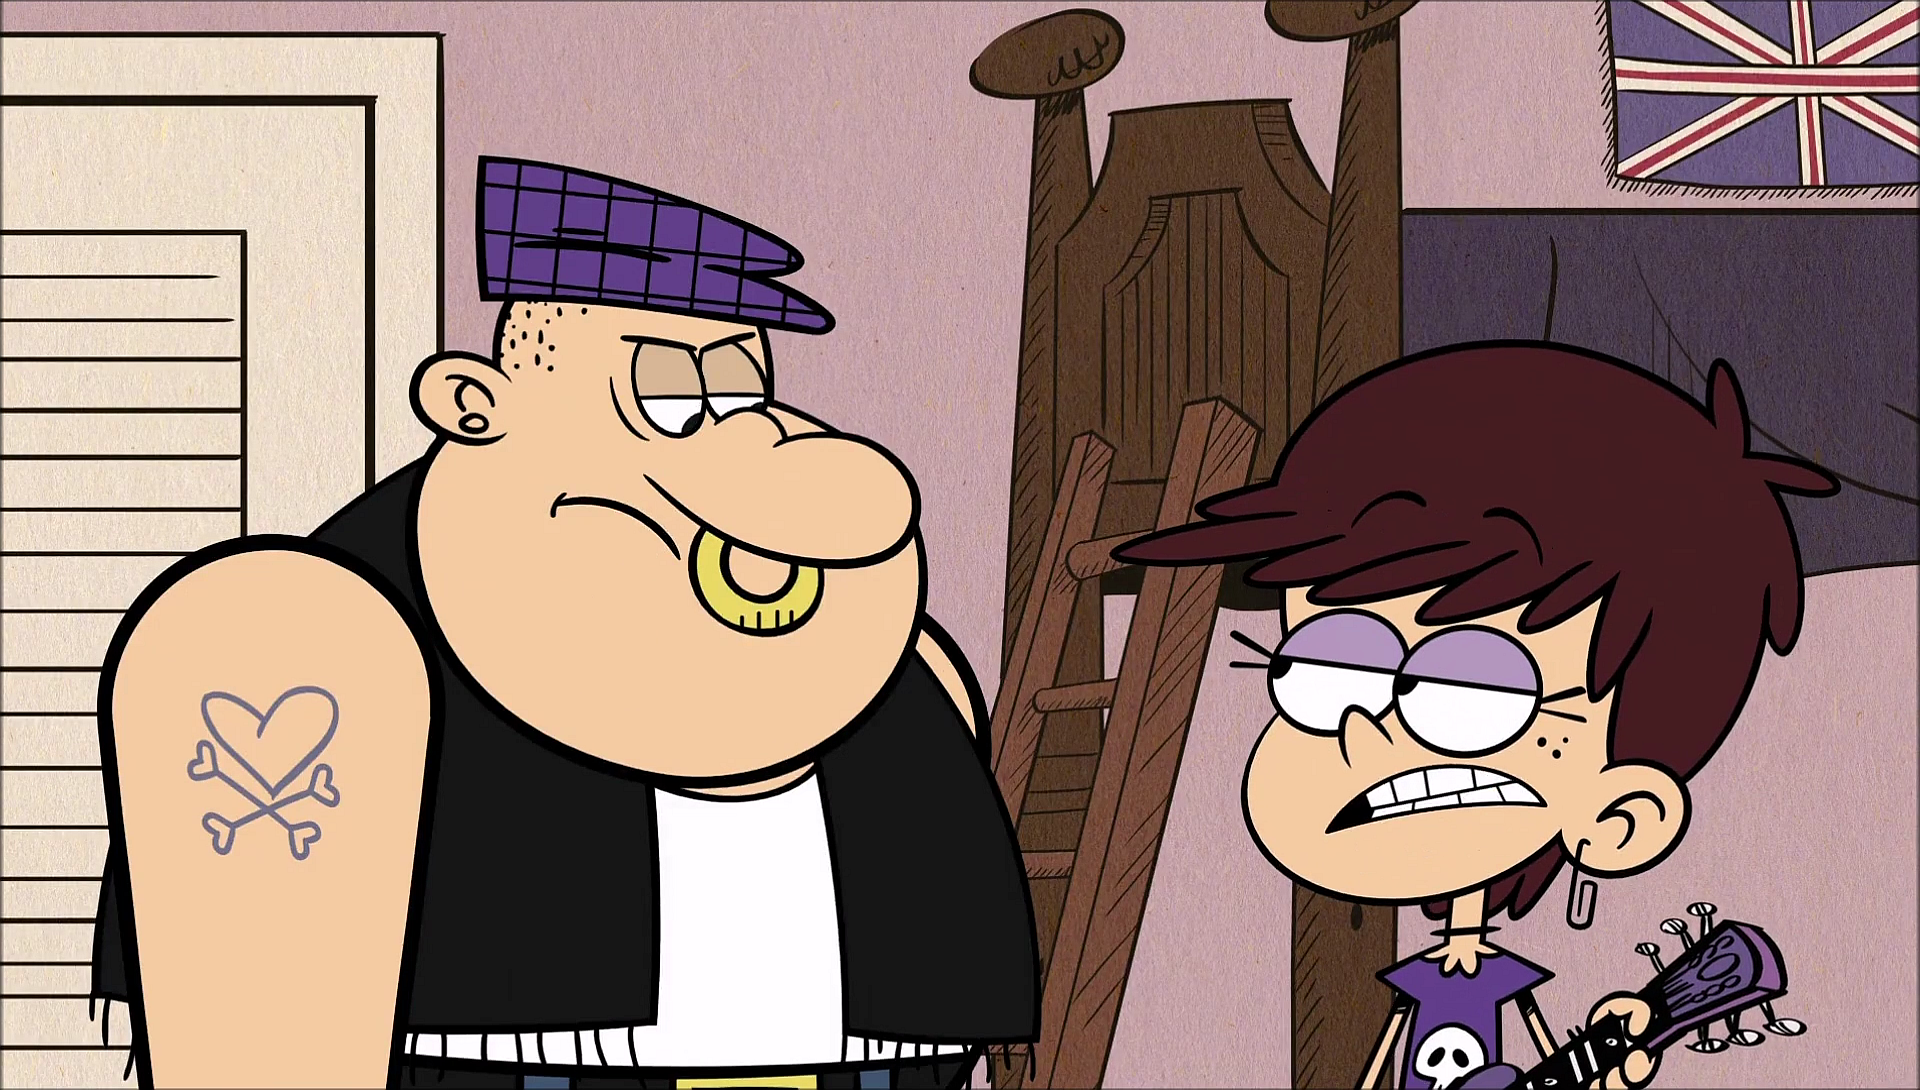 Way To Go Animated Png - S1E12B Way Harsh, Chunk.png, Transparent background PNG HD thumbnail